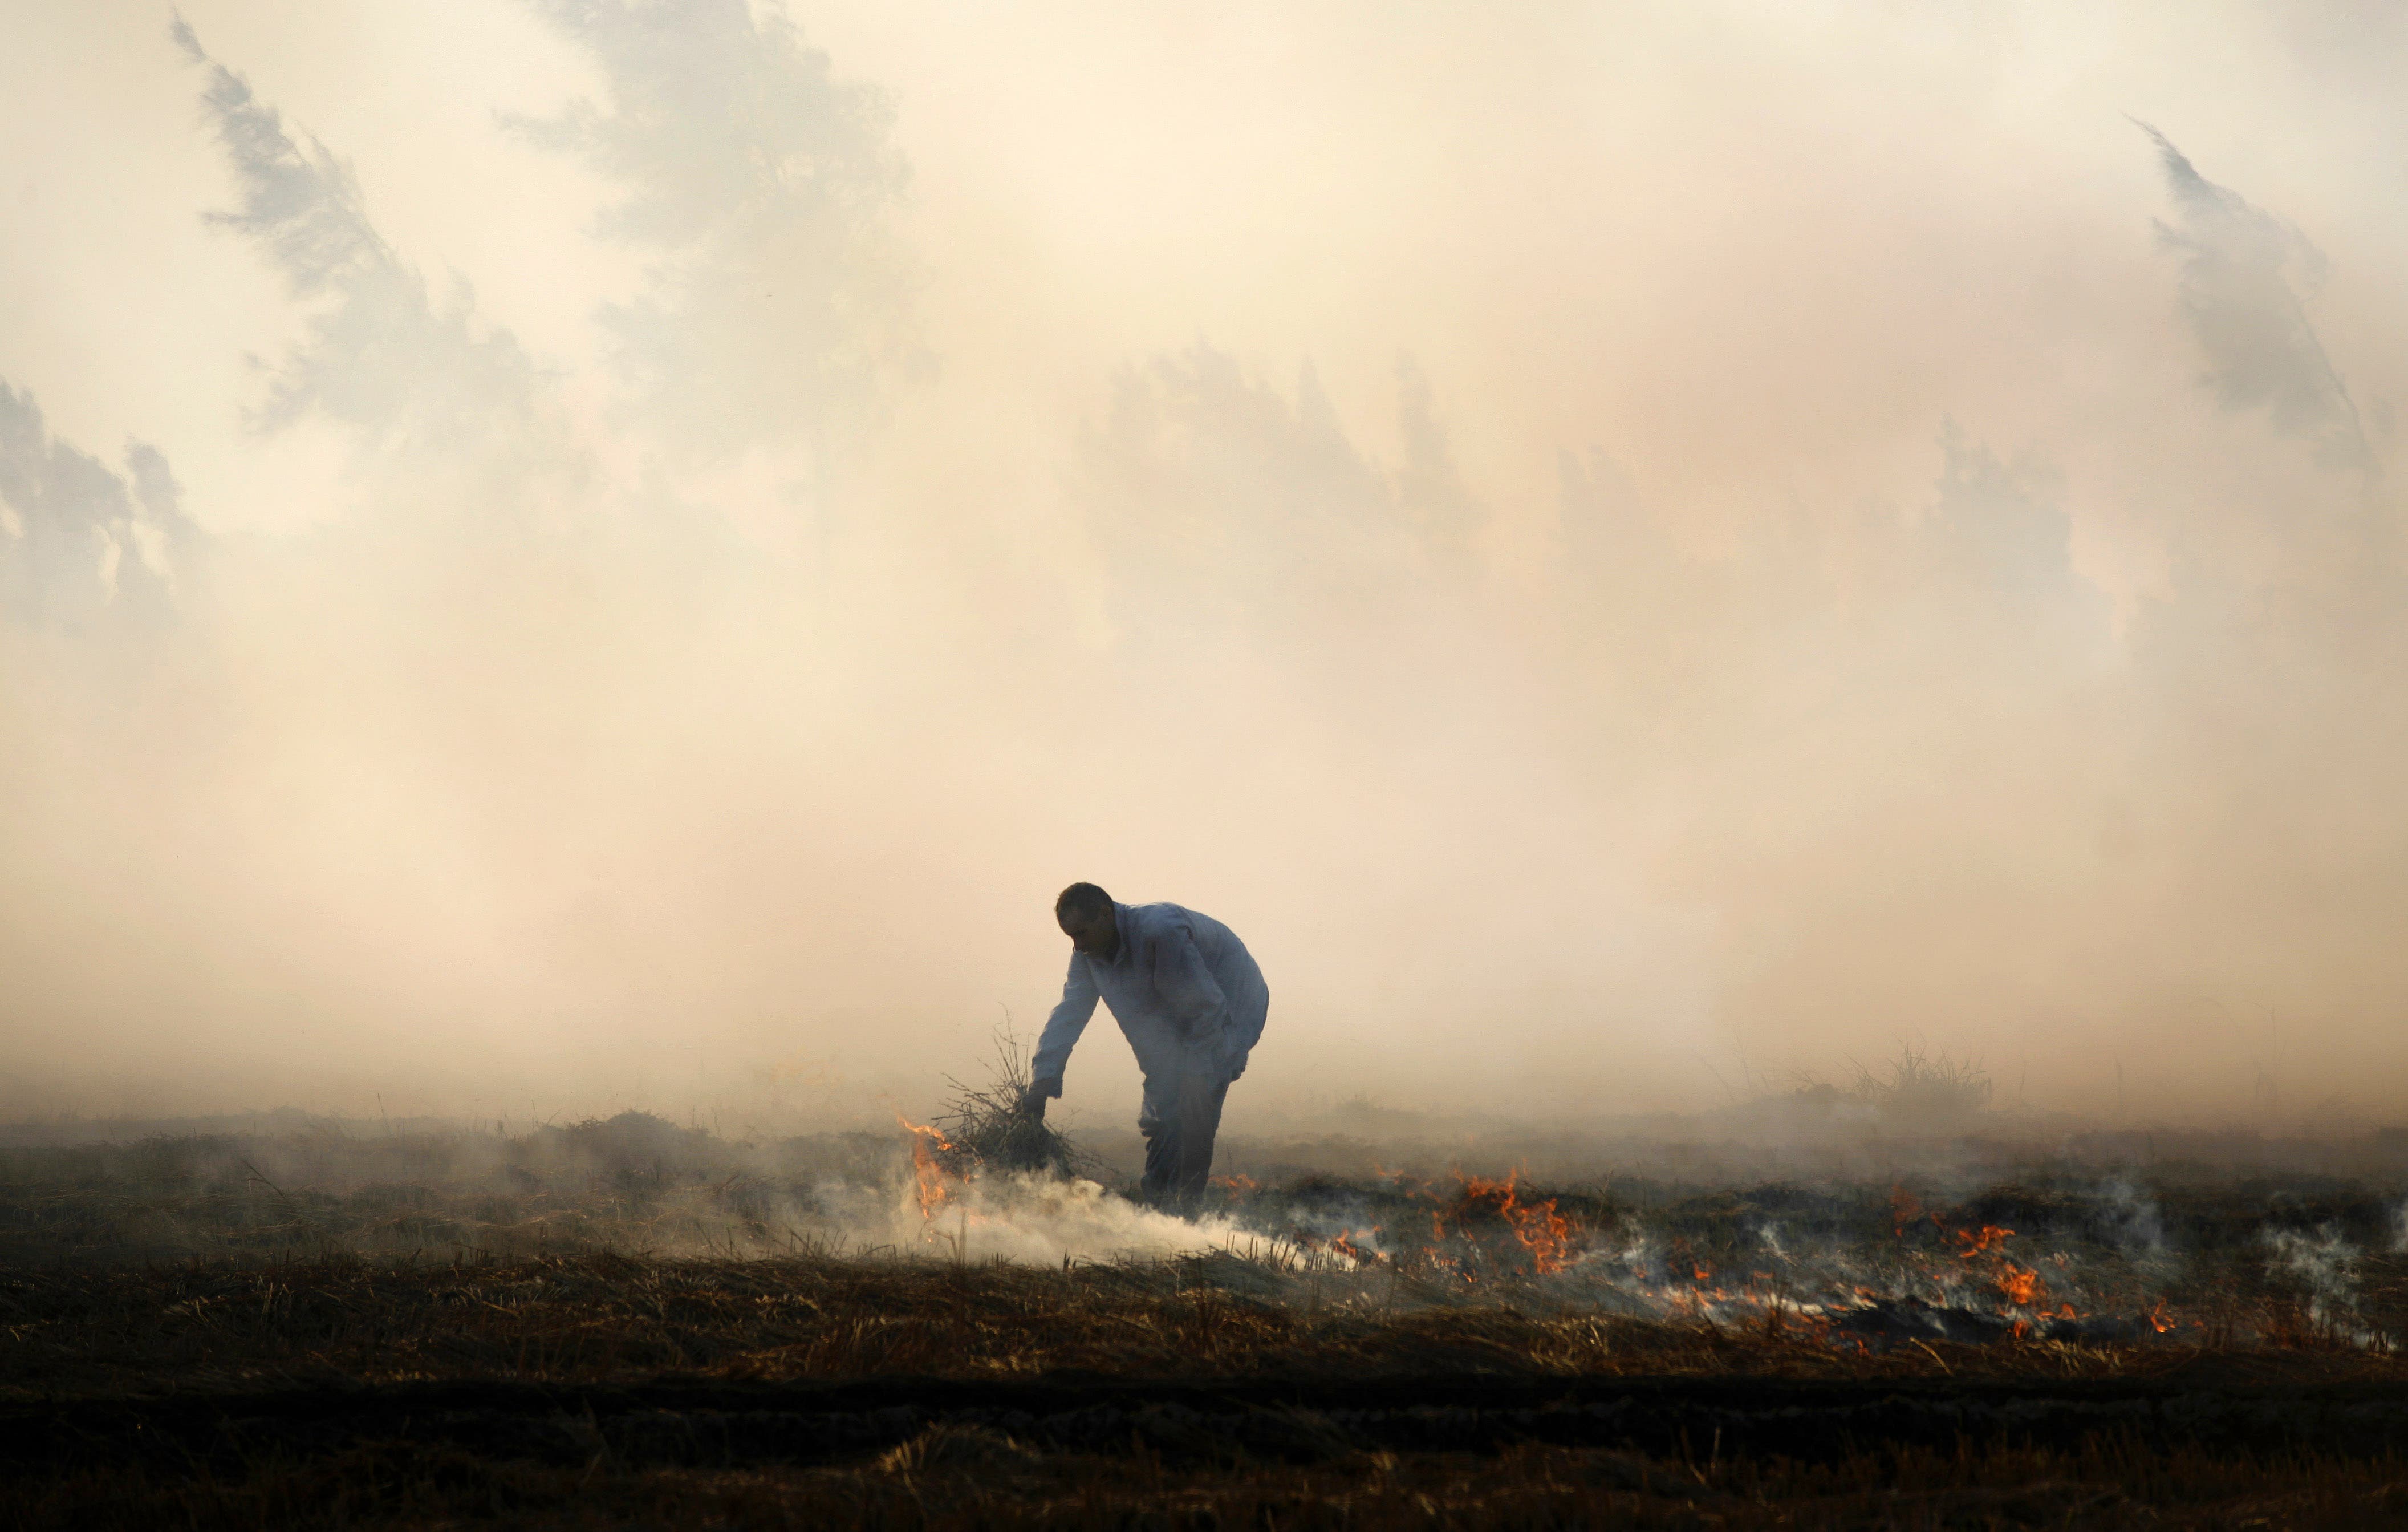 A rice farmer burns hay in a field, the traditional method of clearing fields before planting new crops, on the outskirts of Mansoura, on the Nile Delta, Egypt. (File photo: AP)